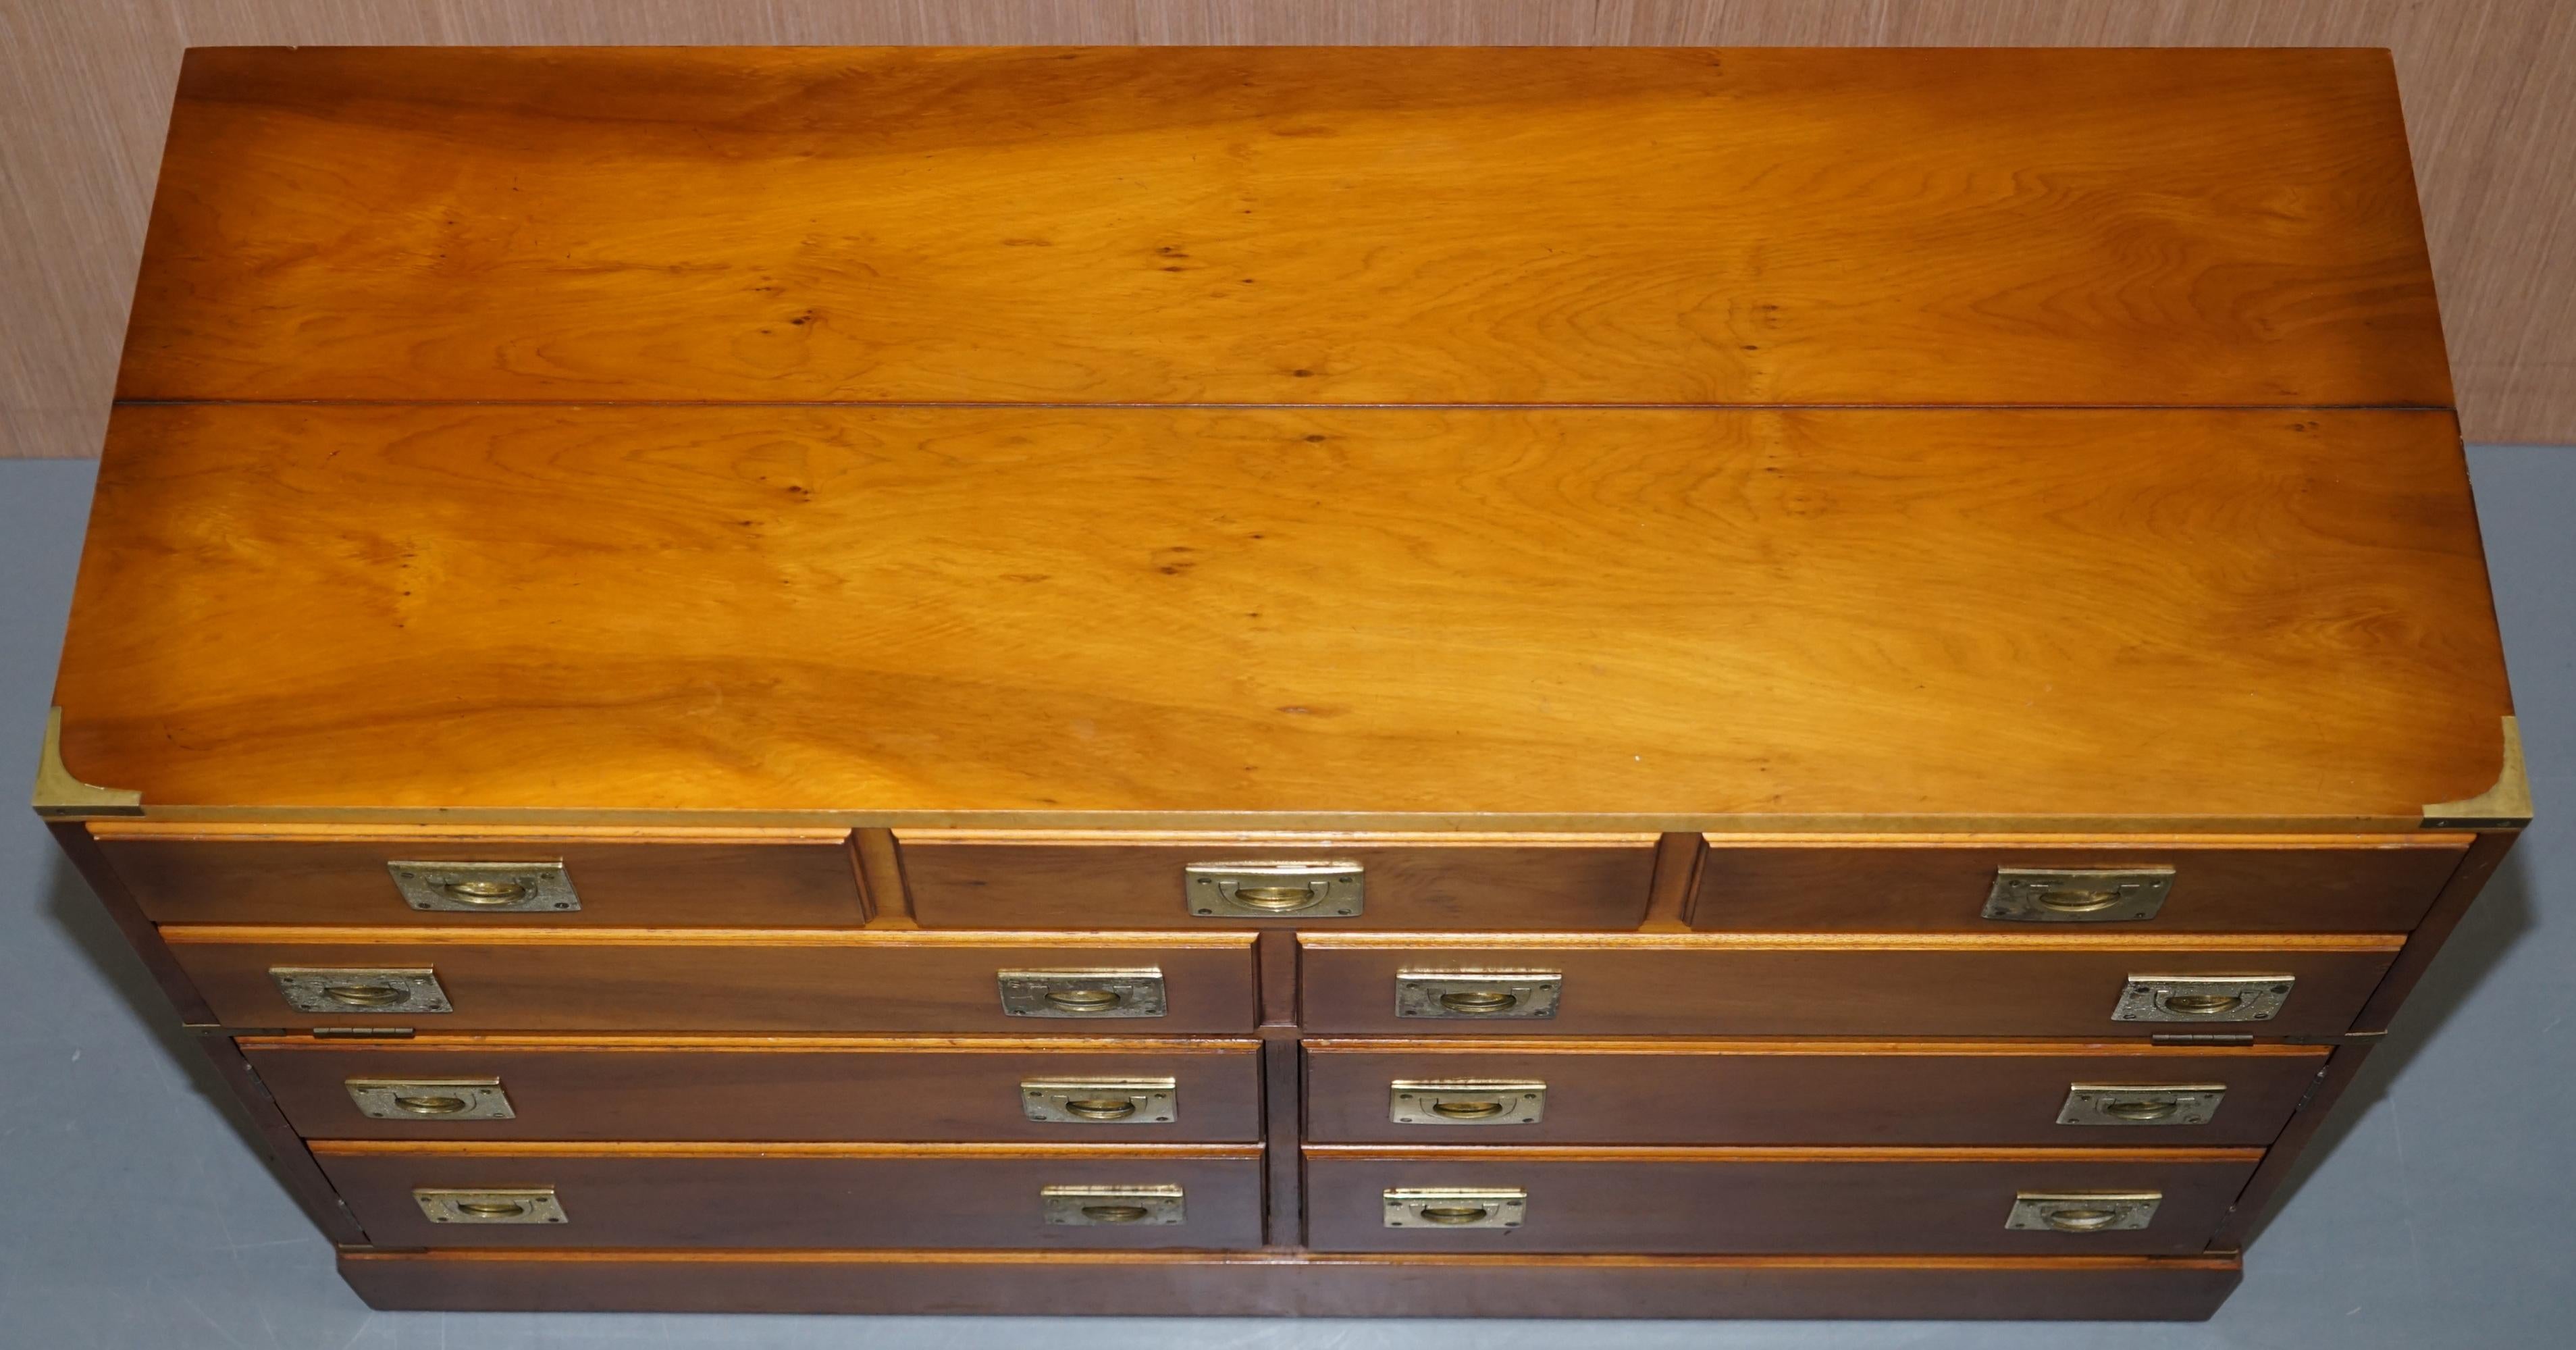 Hand-Crafted Record Player Cabinet Hidden Inside Military Campaign Chest of Drawers